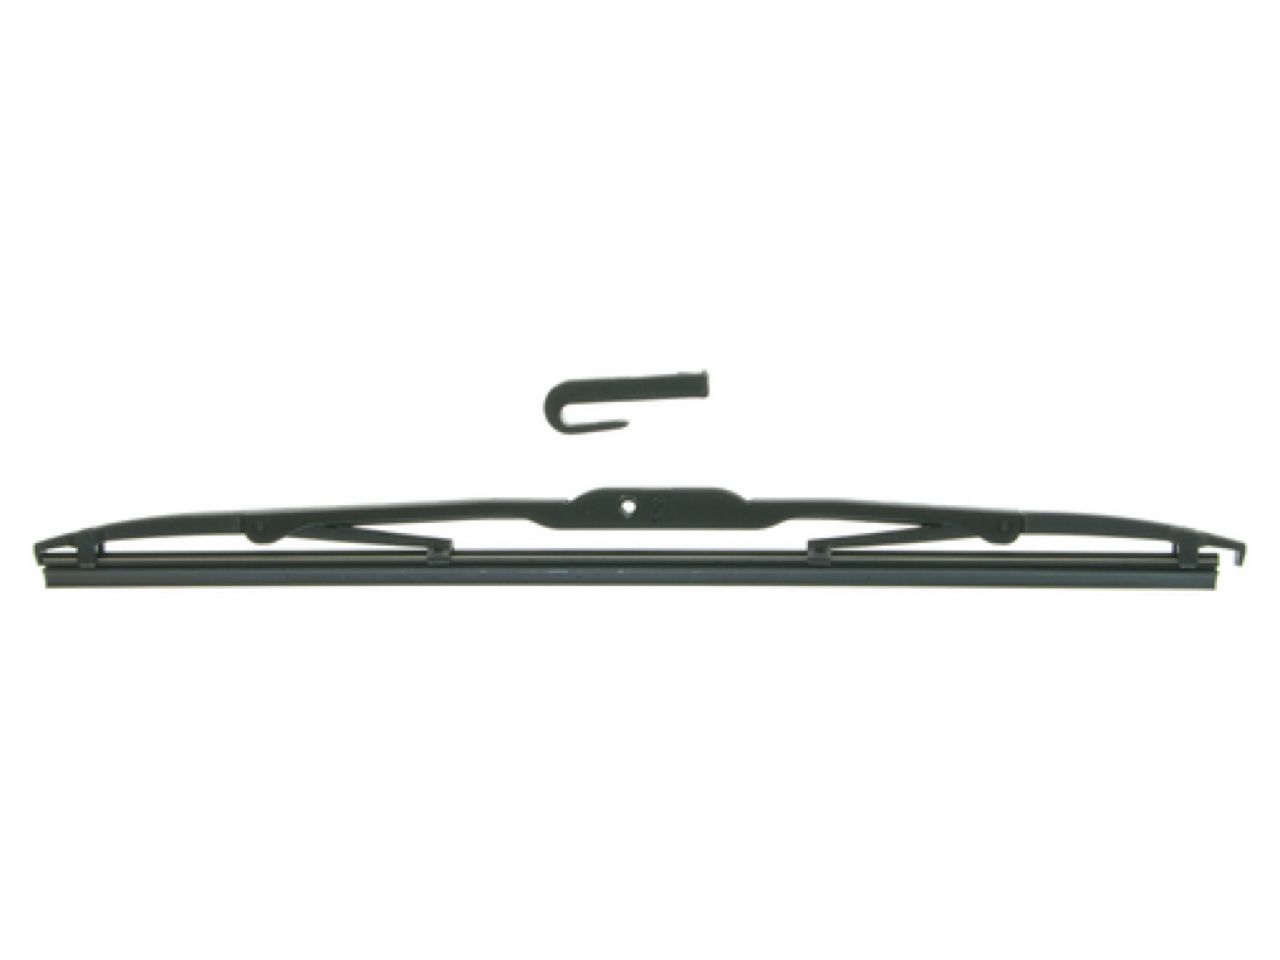 Anco Windshield Wipers 31-15 Item Image